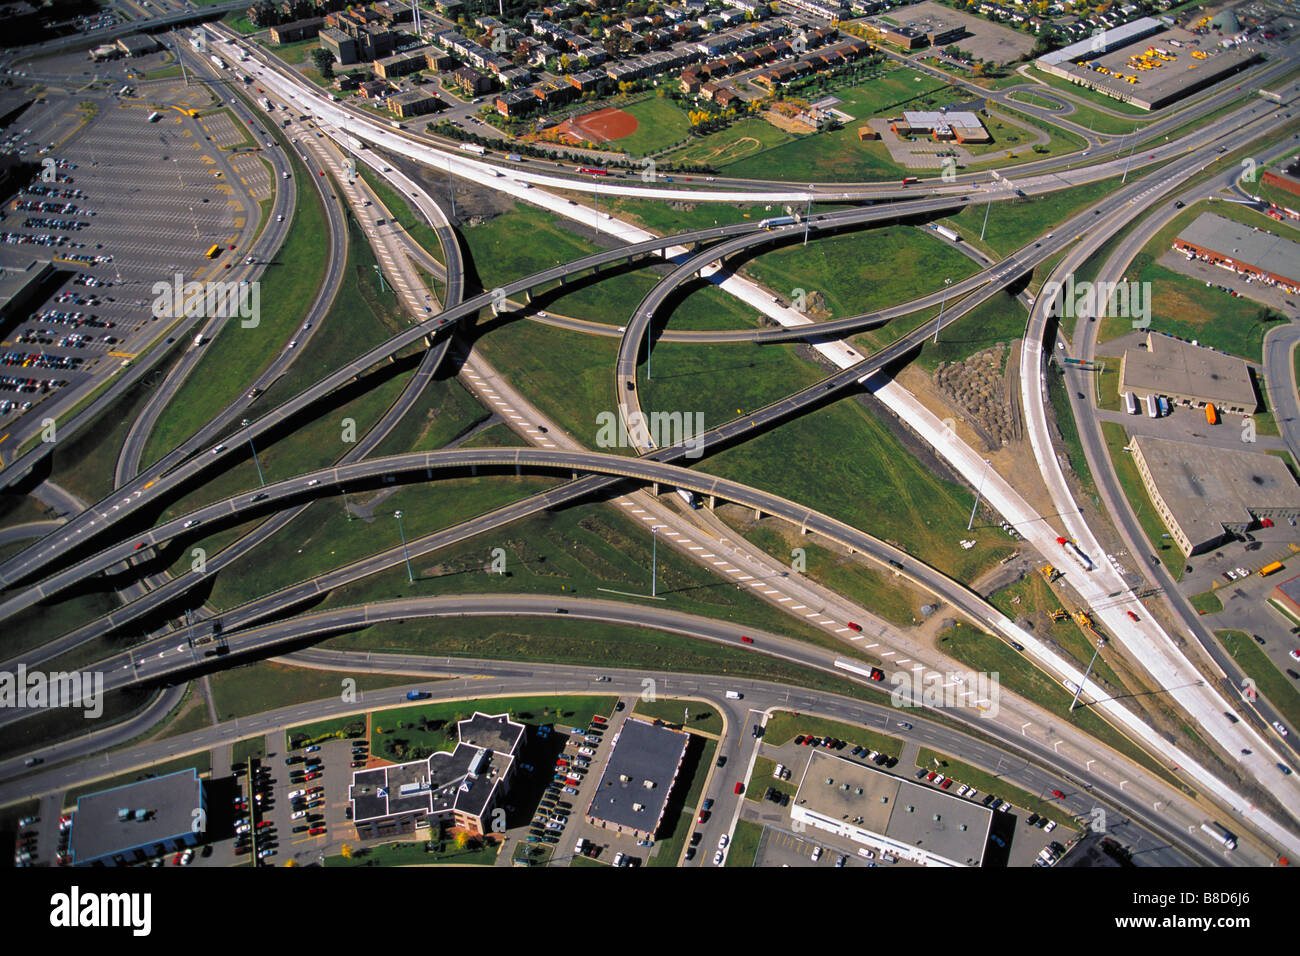 Overlapping Highways, Montreal, Quebec Stock Photo